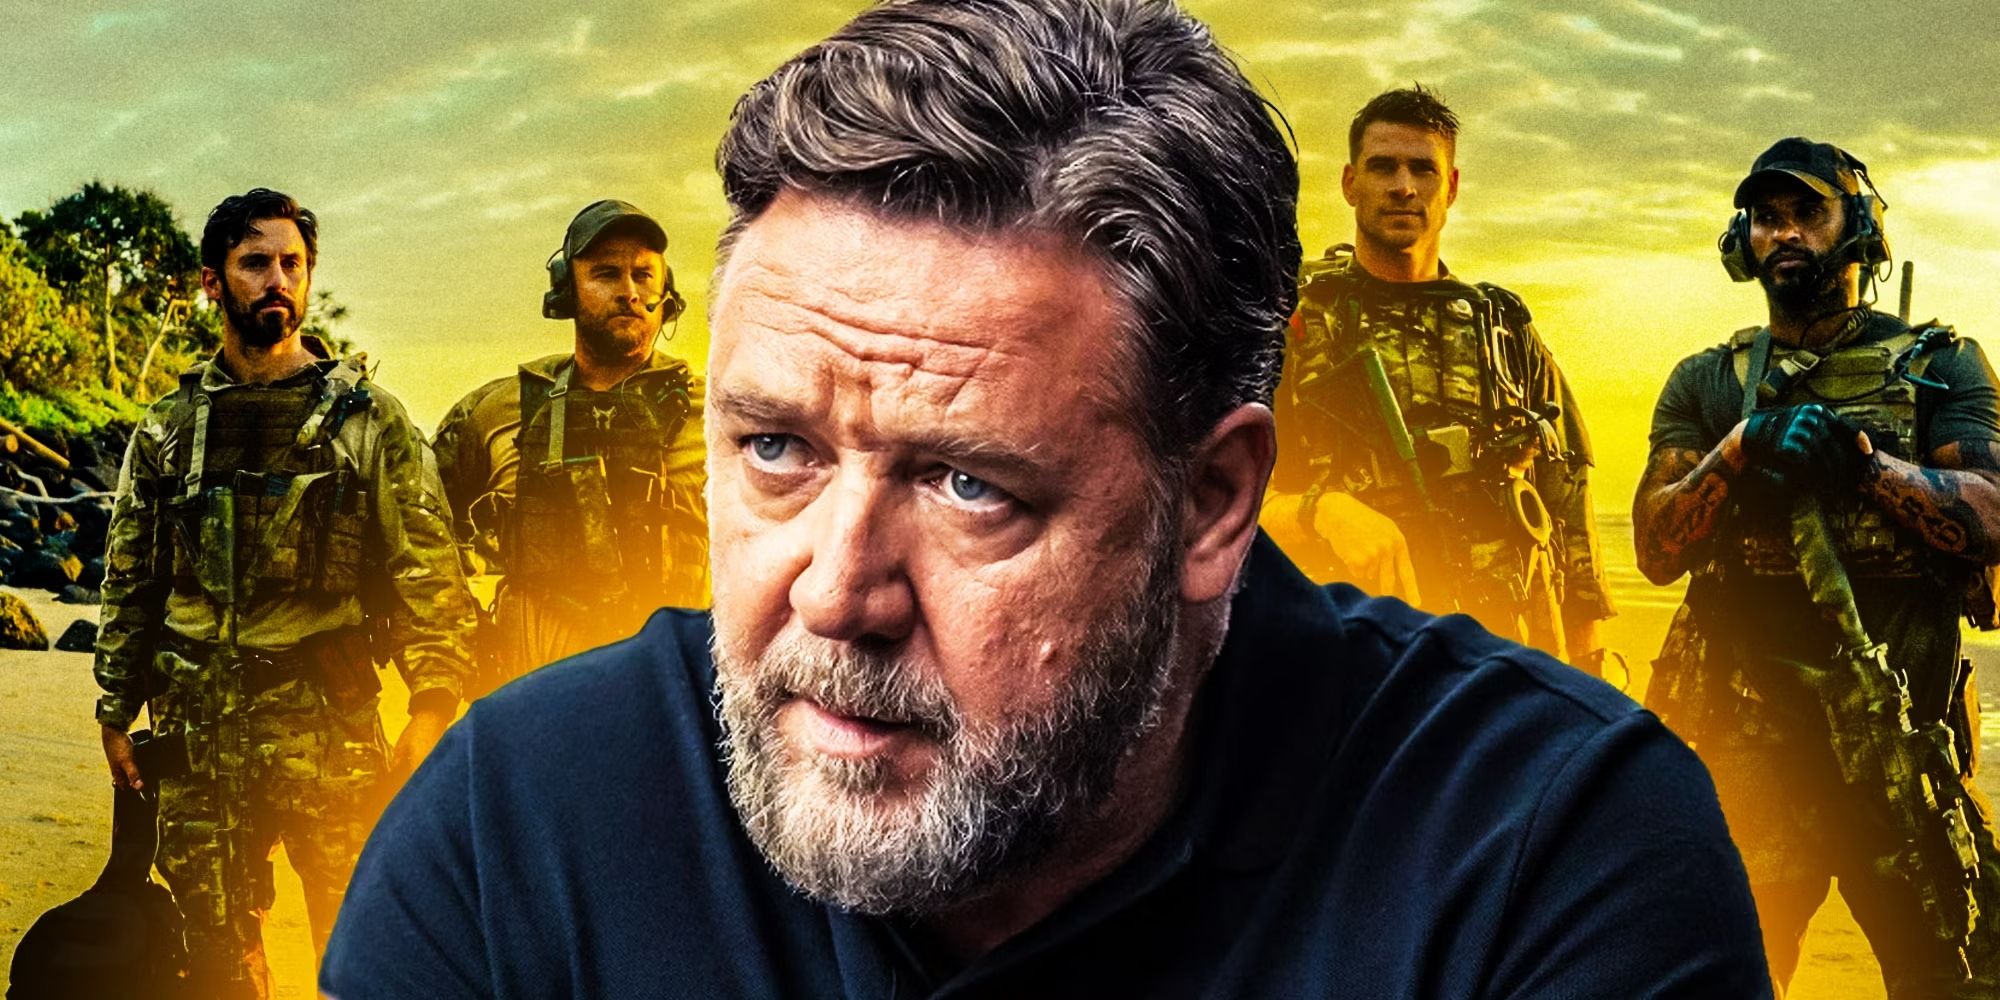 Russell Crowe and the Land of Bad cast